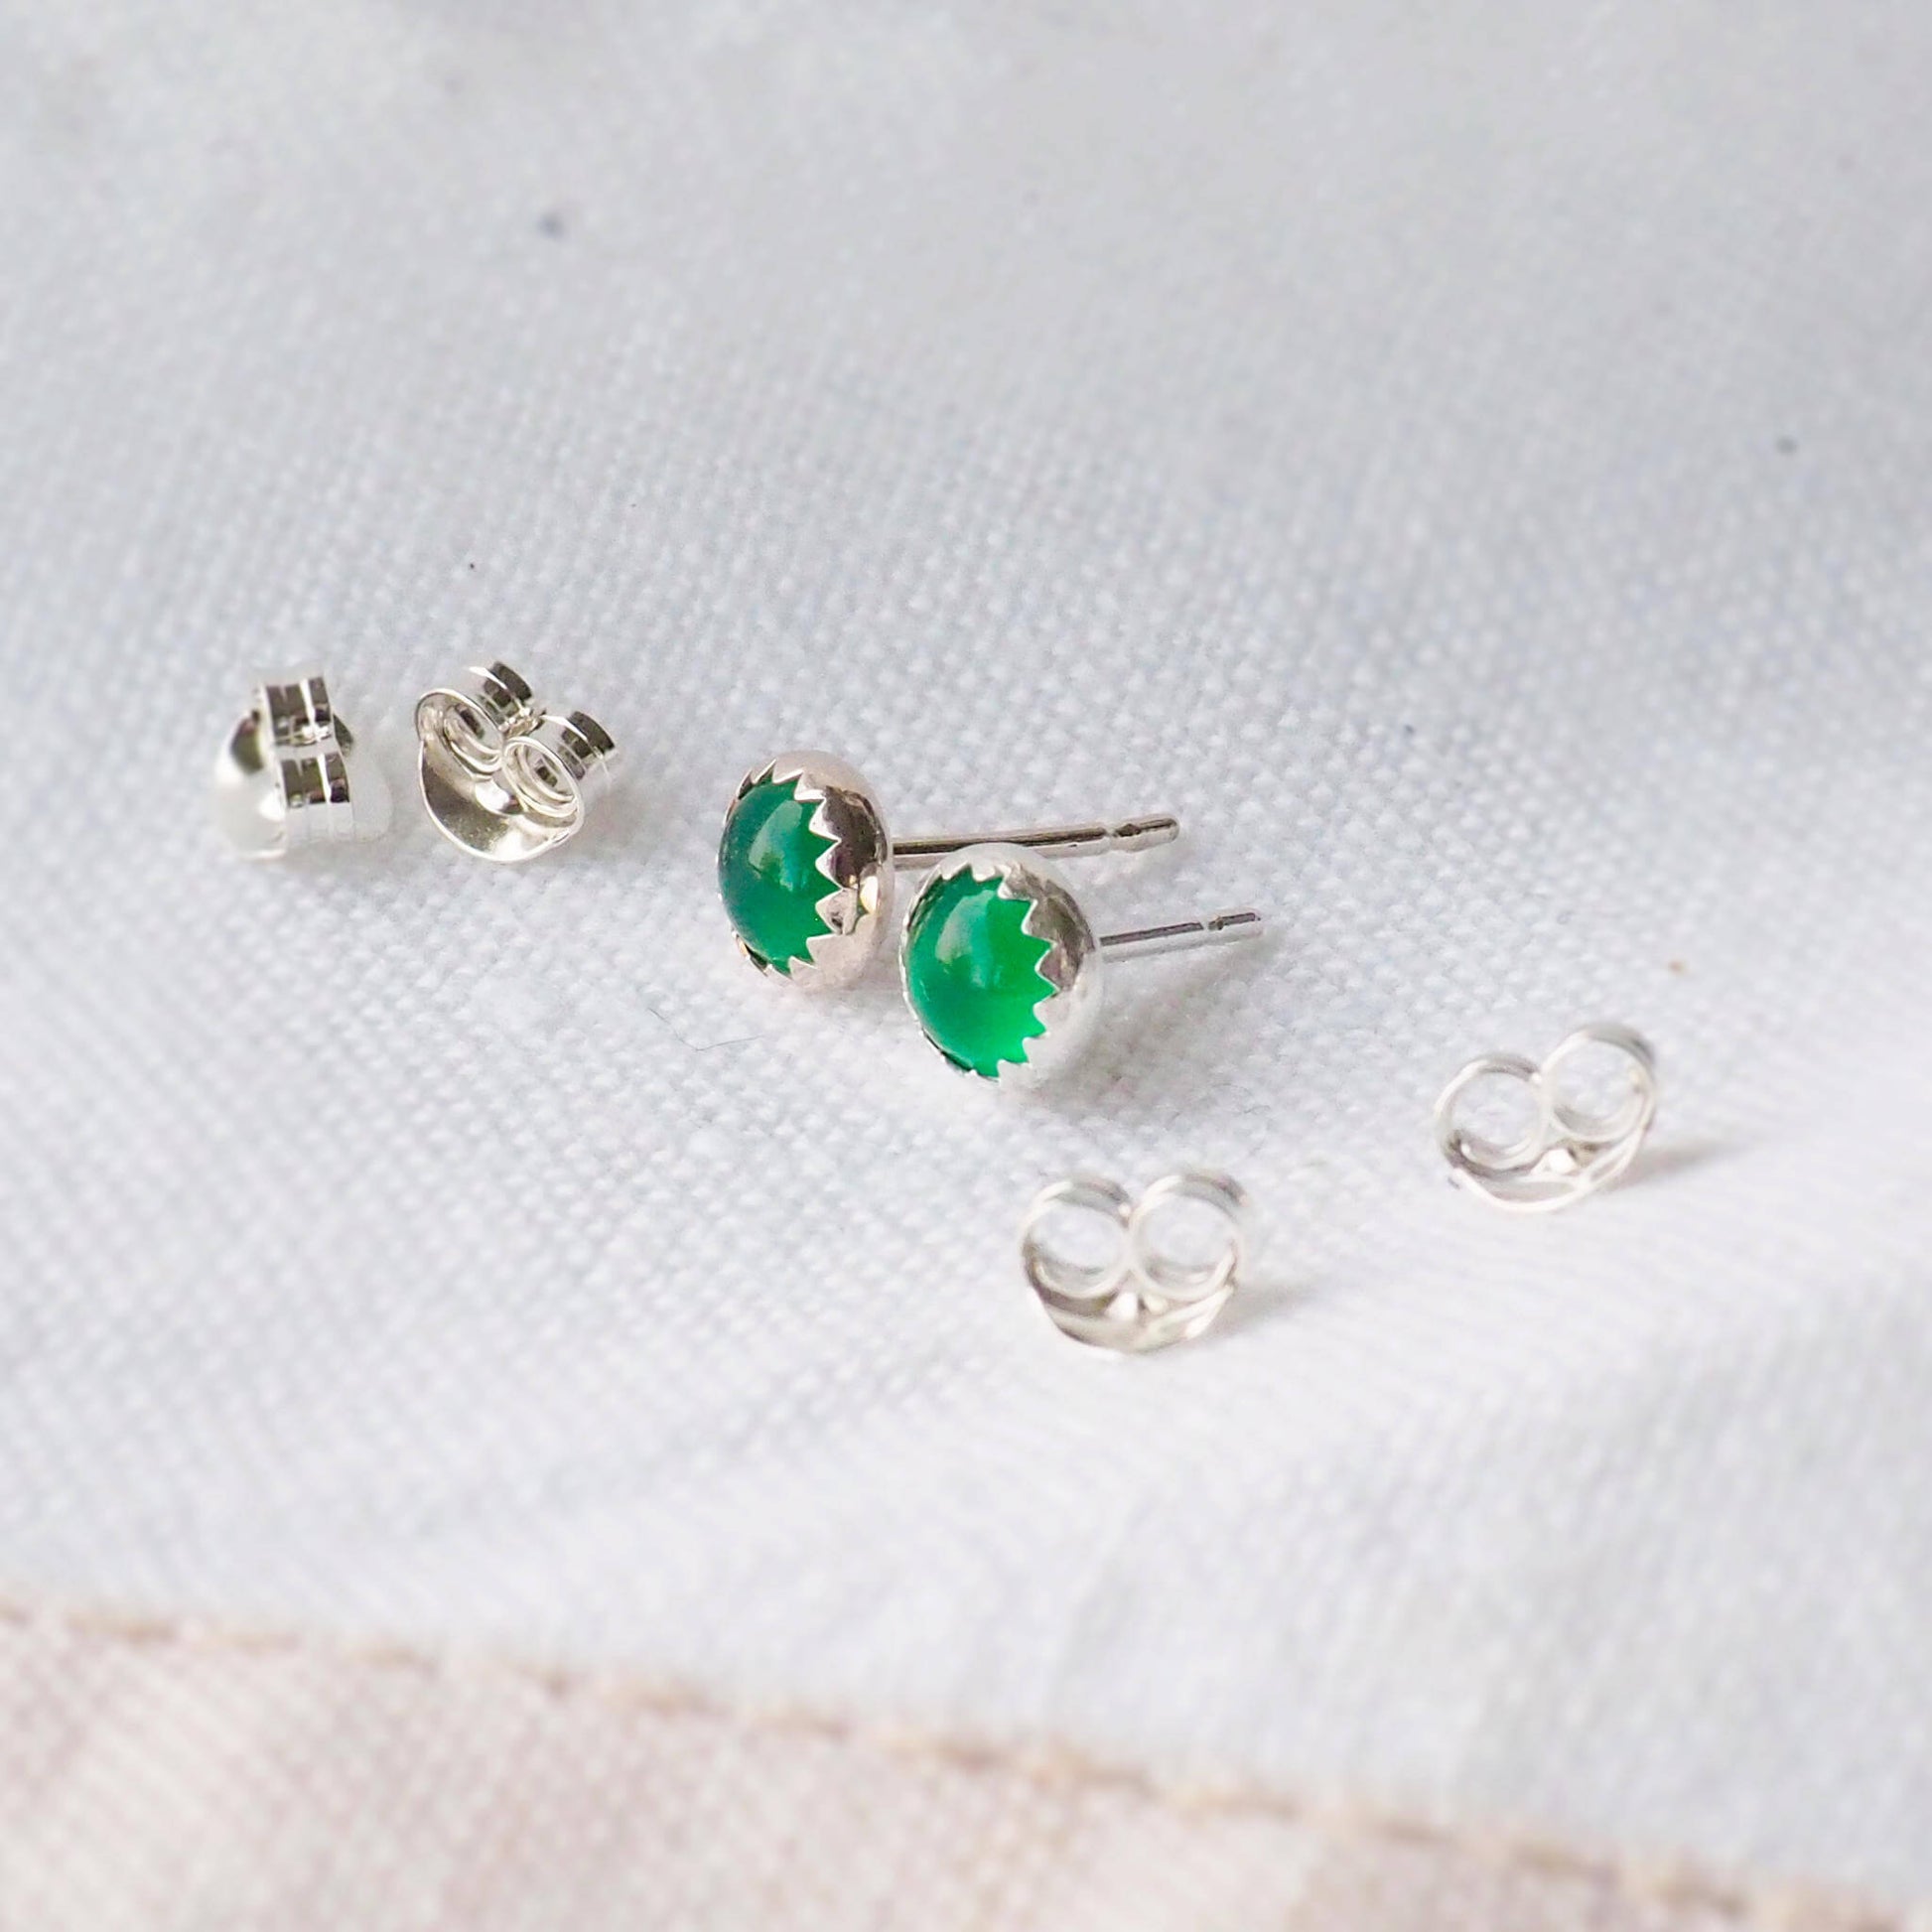 Modern styled emerald green birthstone earrings with a minimalist look. made from sterling silver and green agate, these are simple style earrings pictures on a neutral linen backdrop